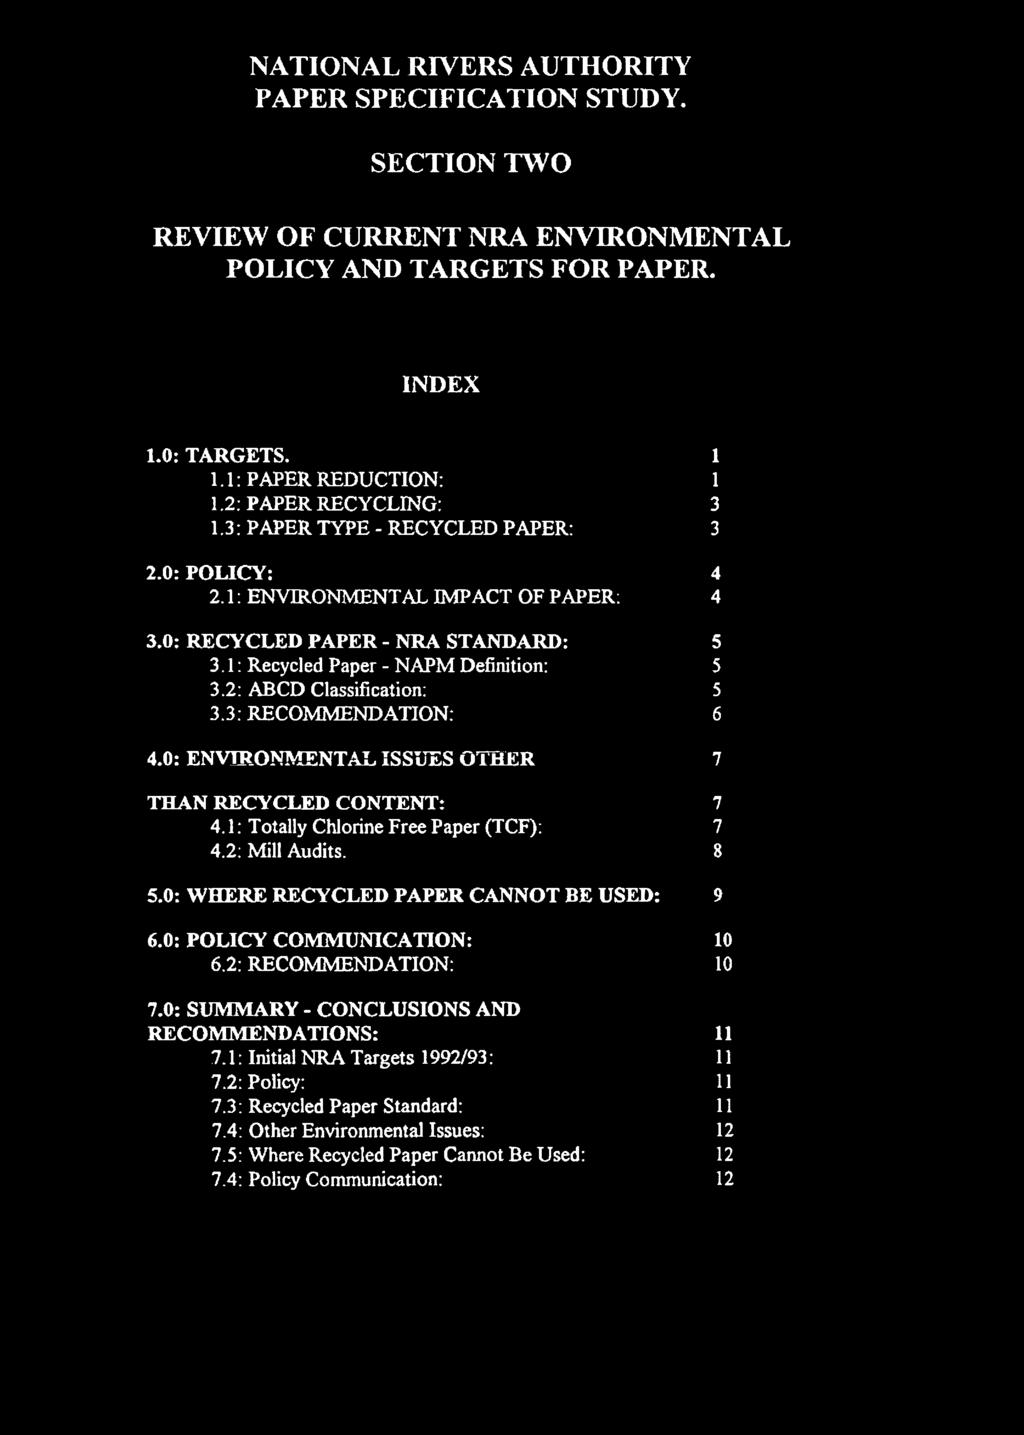 NATIONAL RIVERS AUTHORITY PAPER SPECIFICATION STUDY. SECTION TWO REVIEW OF CURRENT NRA ENVIRONMENTAL POLICY AND TARGETS FOR PAPER. INDEX 1.0: TARGETS. 1 1.1: PAPER REDUCTION: 1 1.